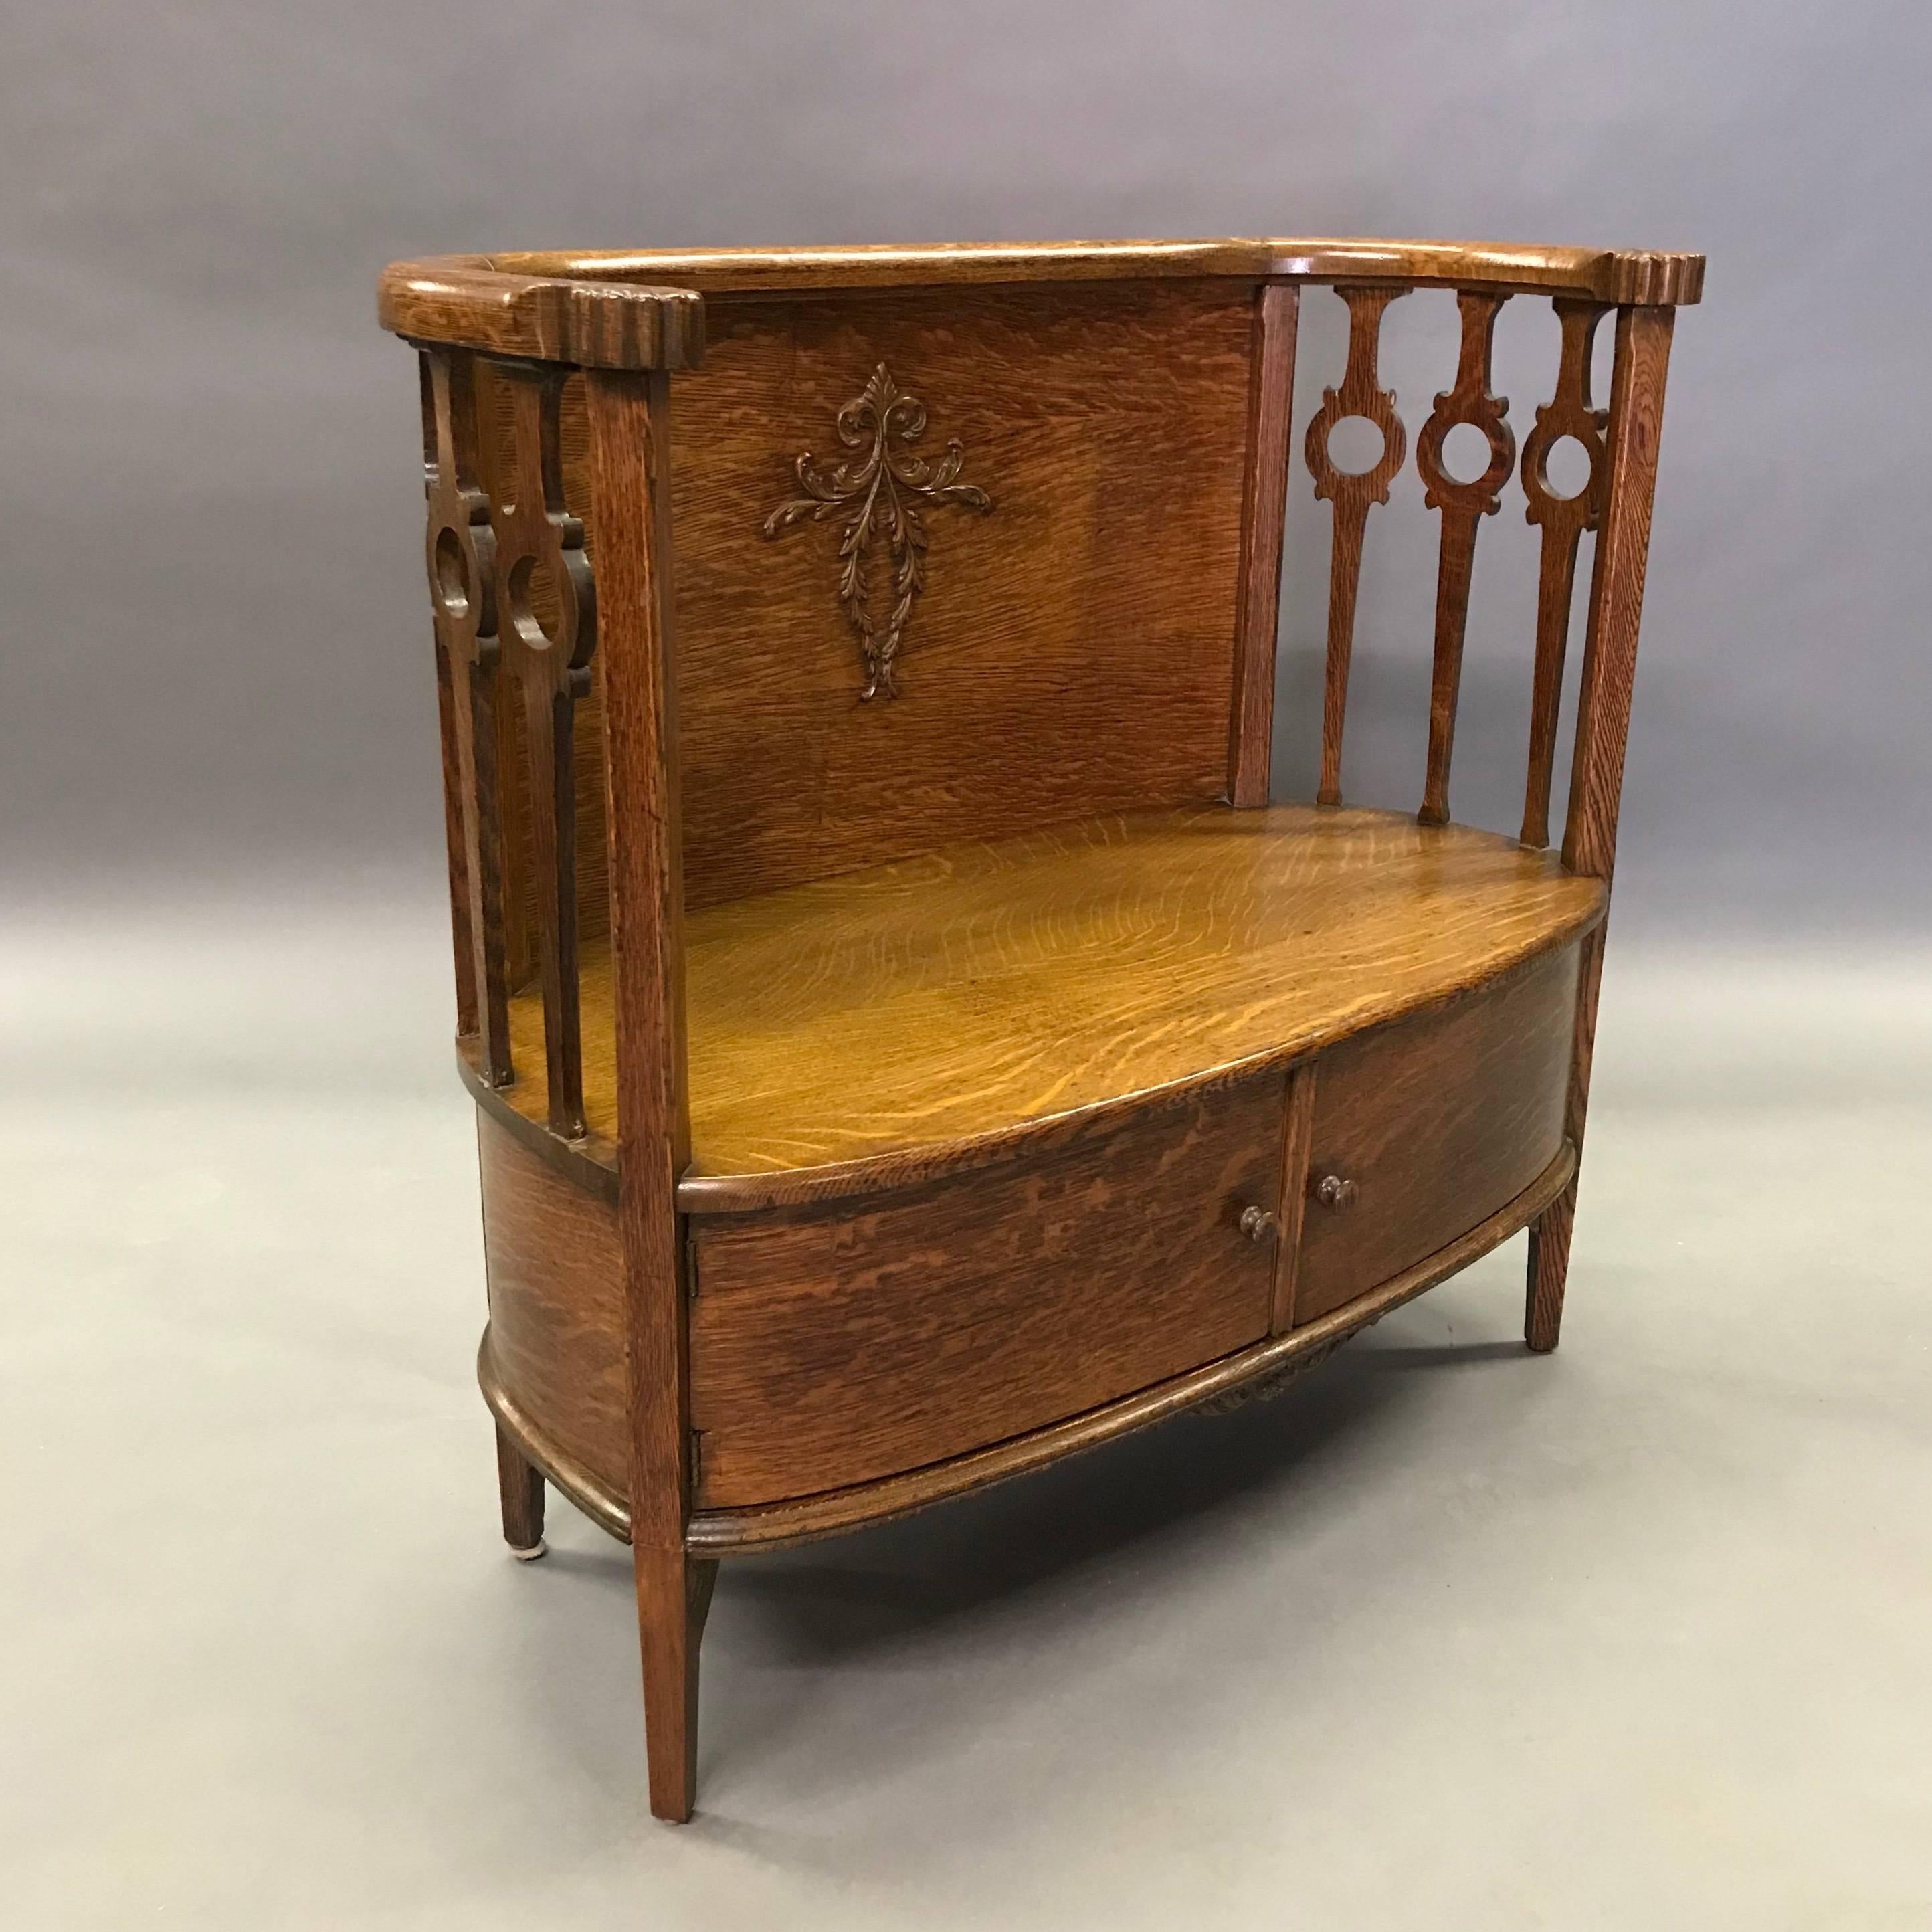 Sweet and wonderfully detailed, late 19th century, antique, tiger oak entryway settle or foyer bench features carved back and arms with hidden cabinet storage underneath.